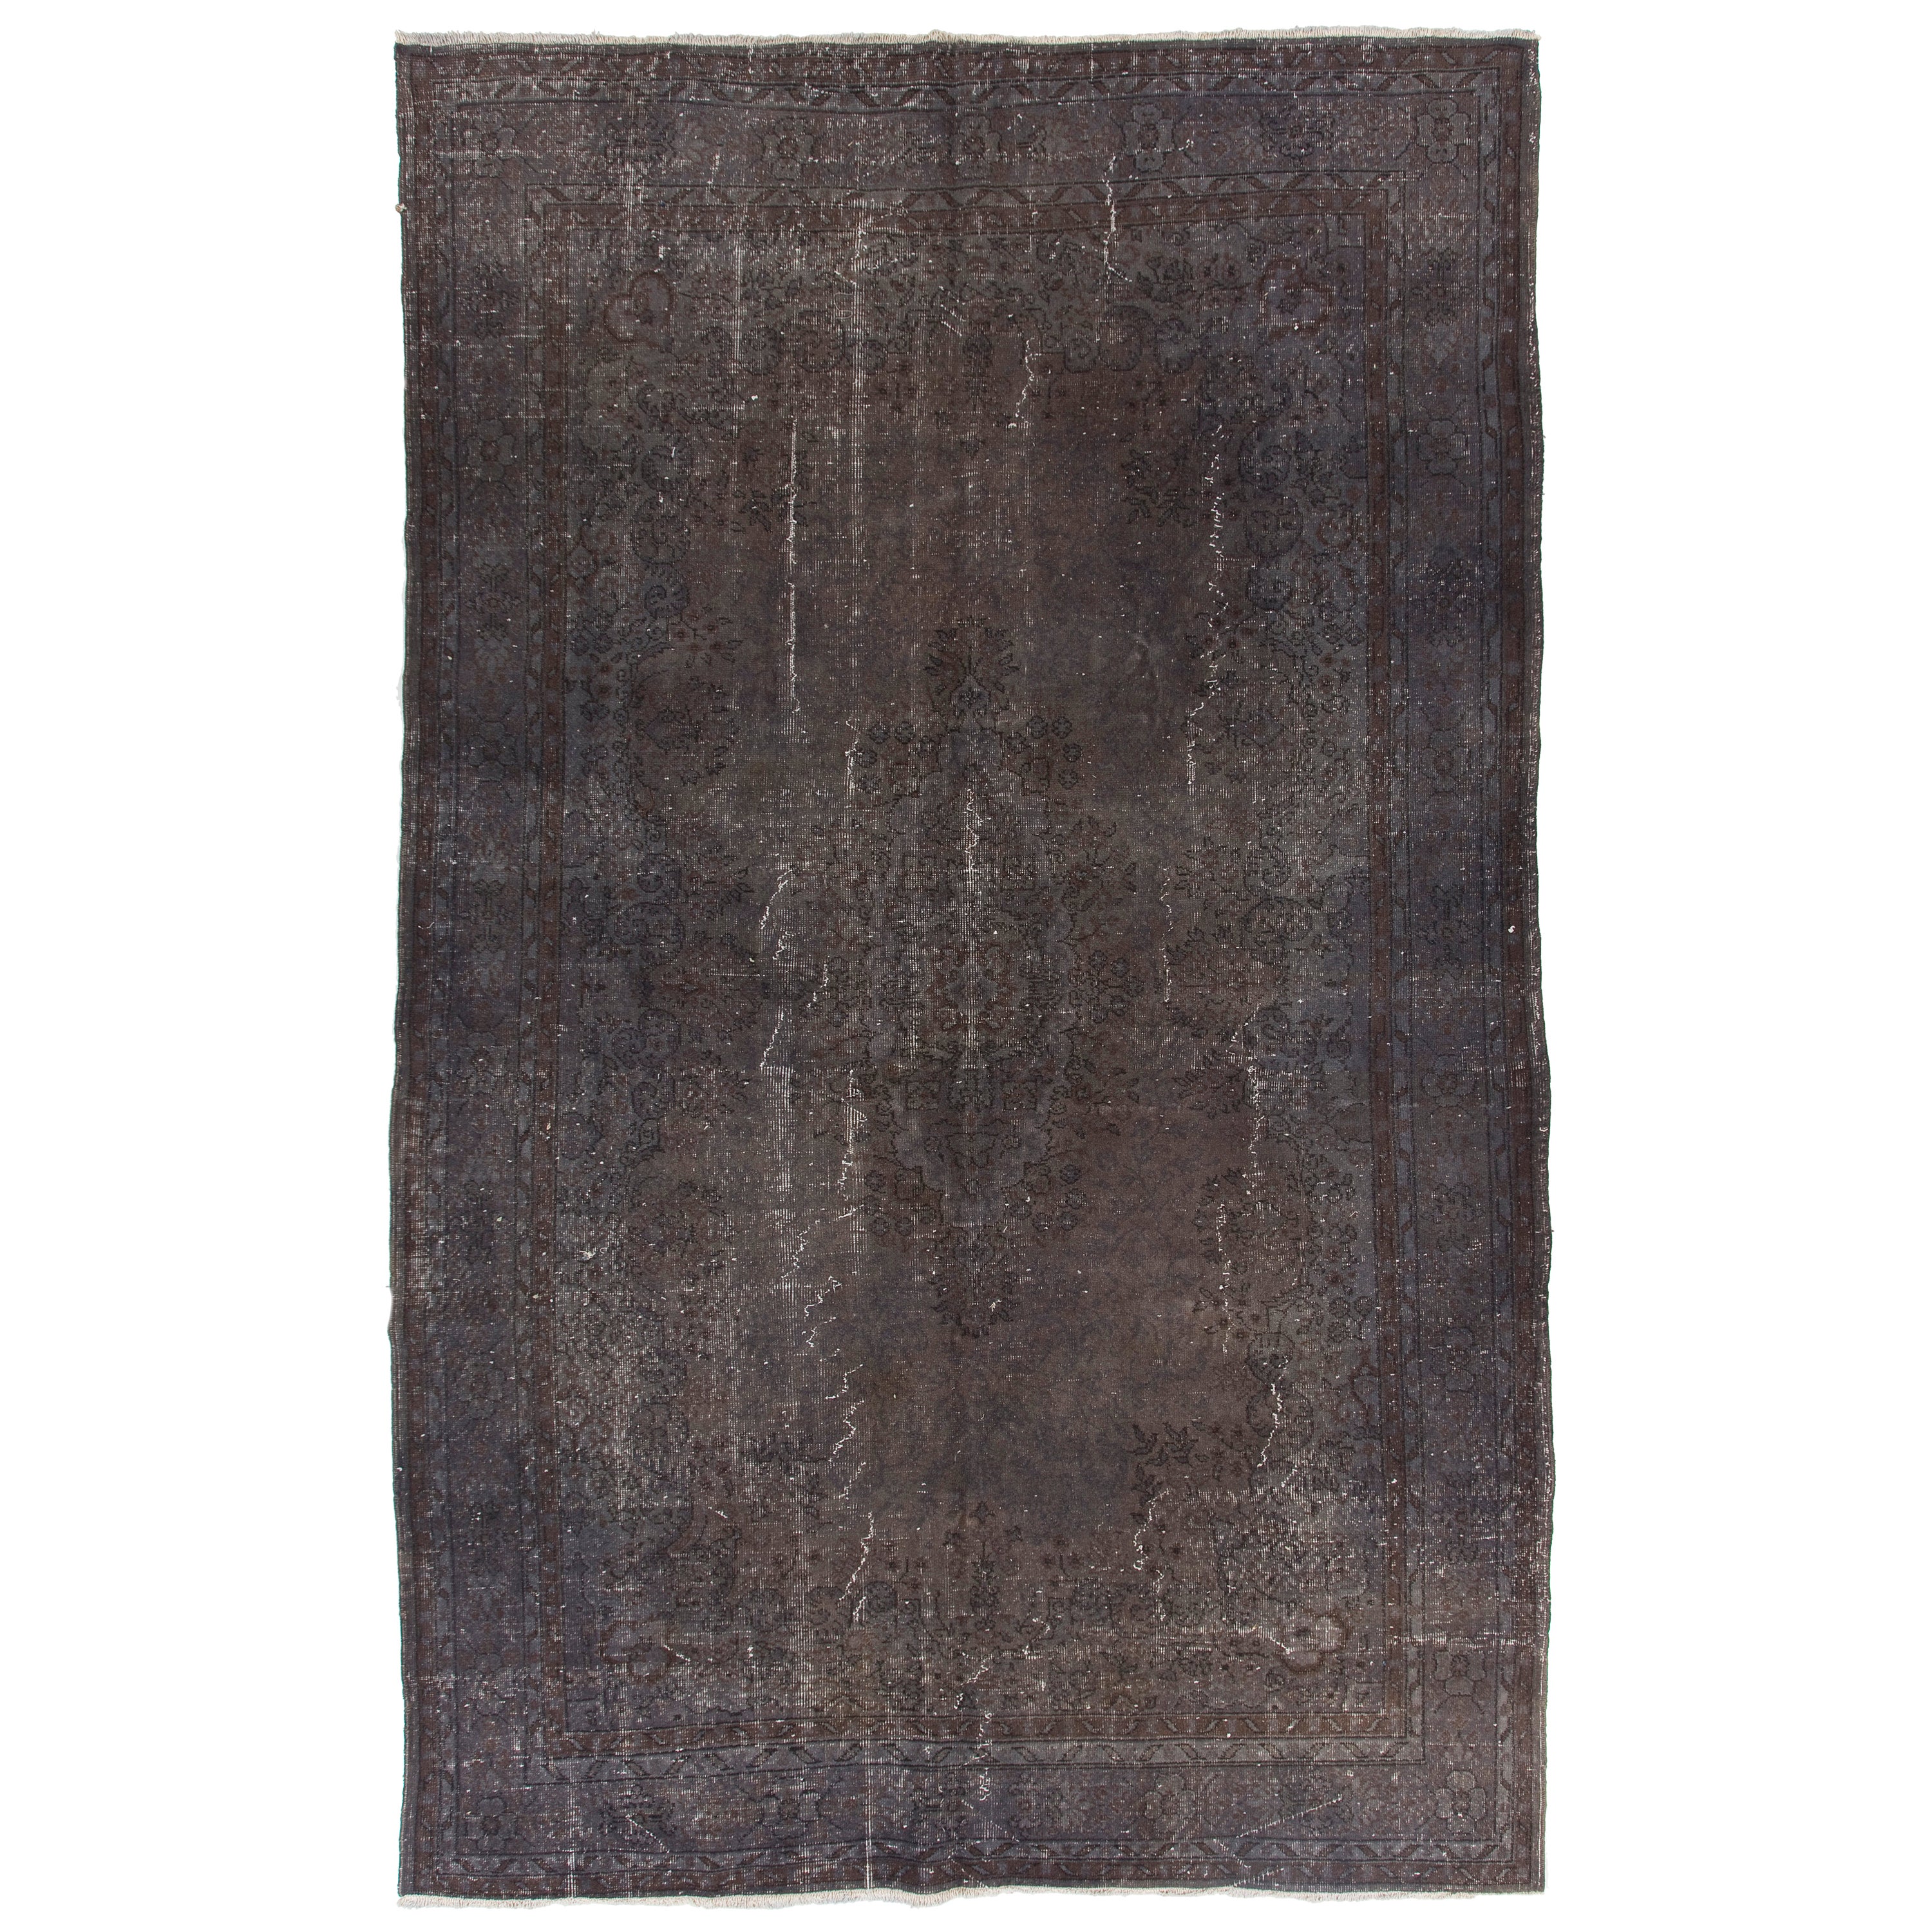 7x11 Ft Handmade Turkish Wool Area Rug in Gray and Brown. Modern Upcycled Carpet For Sale